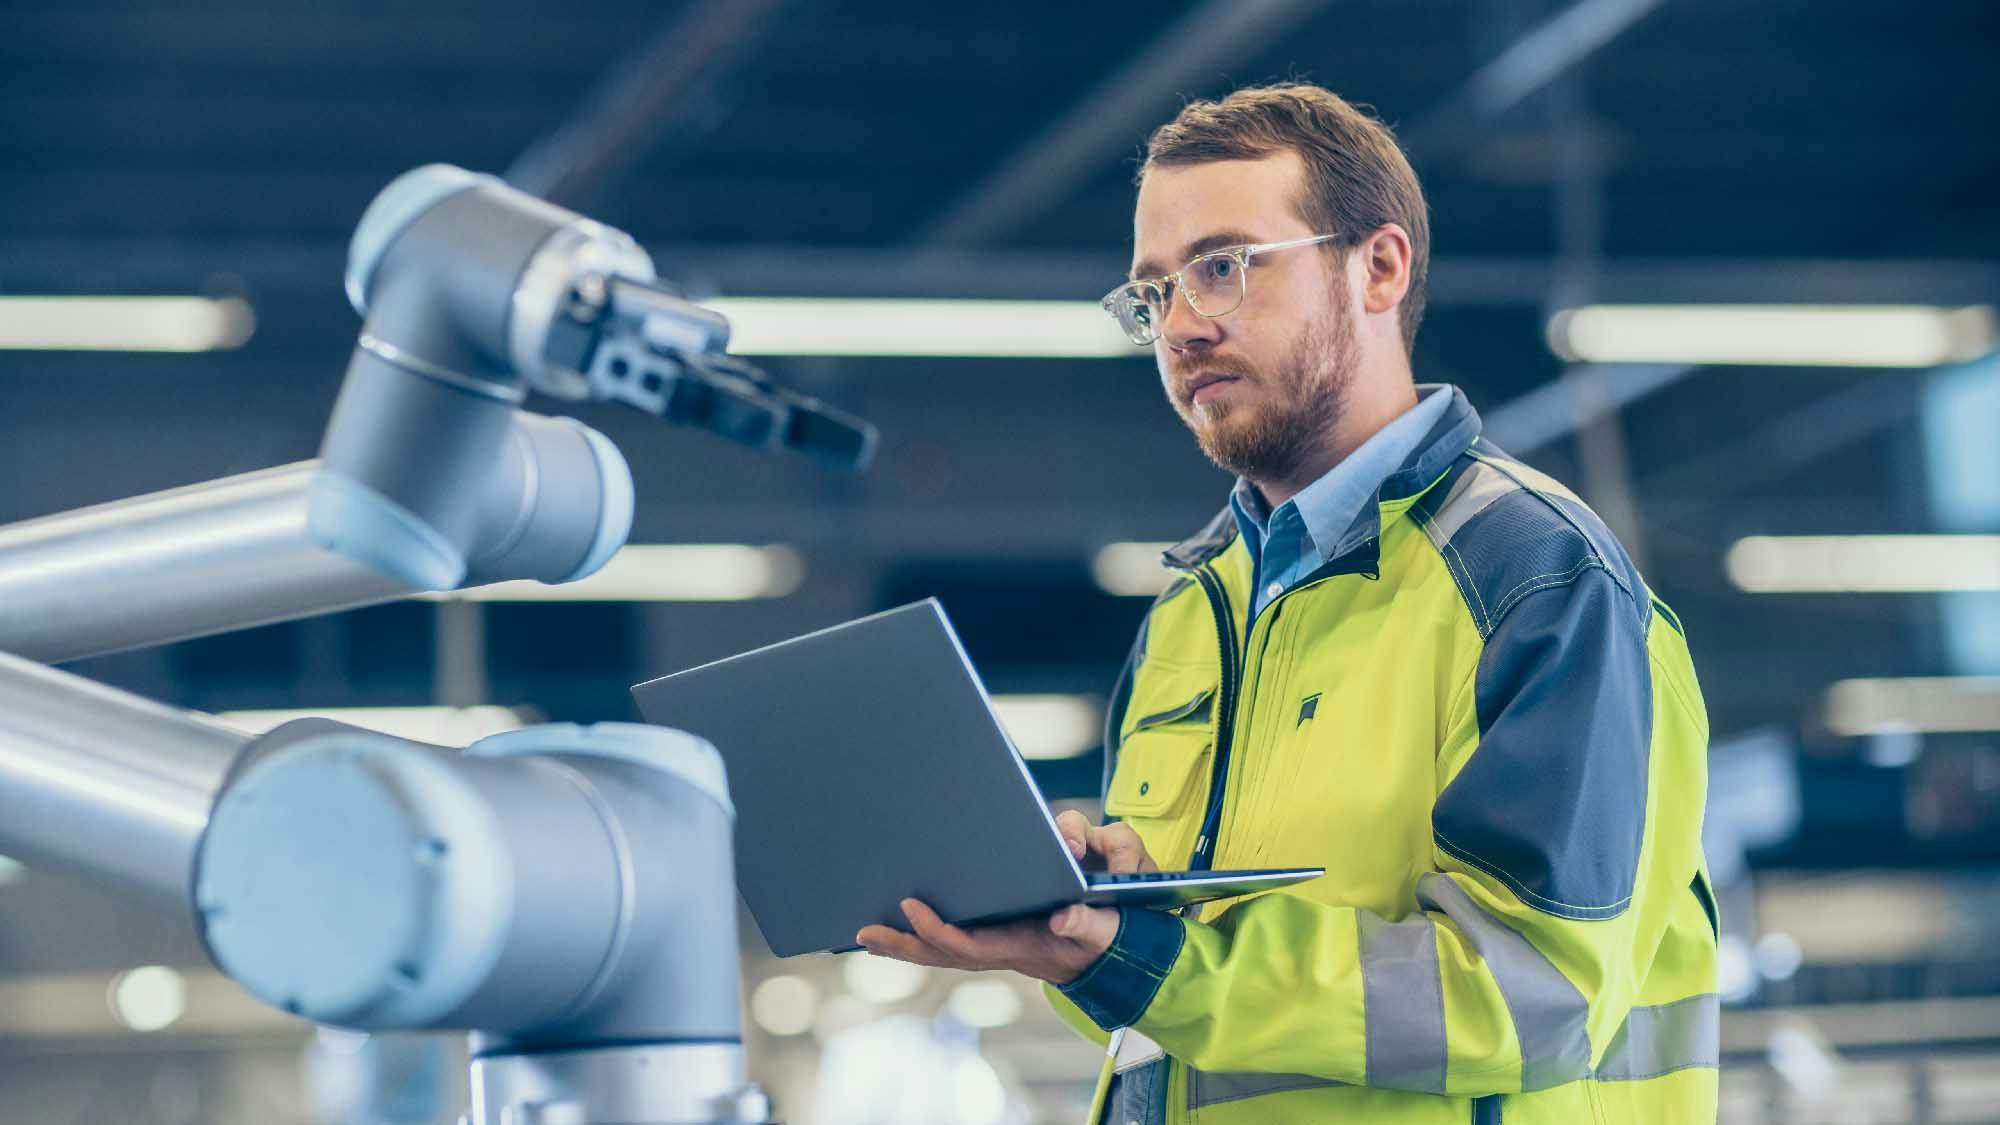 How Digitalization Improves Workplace Safety